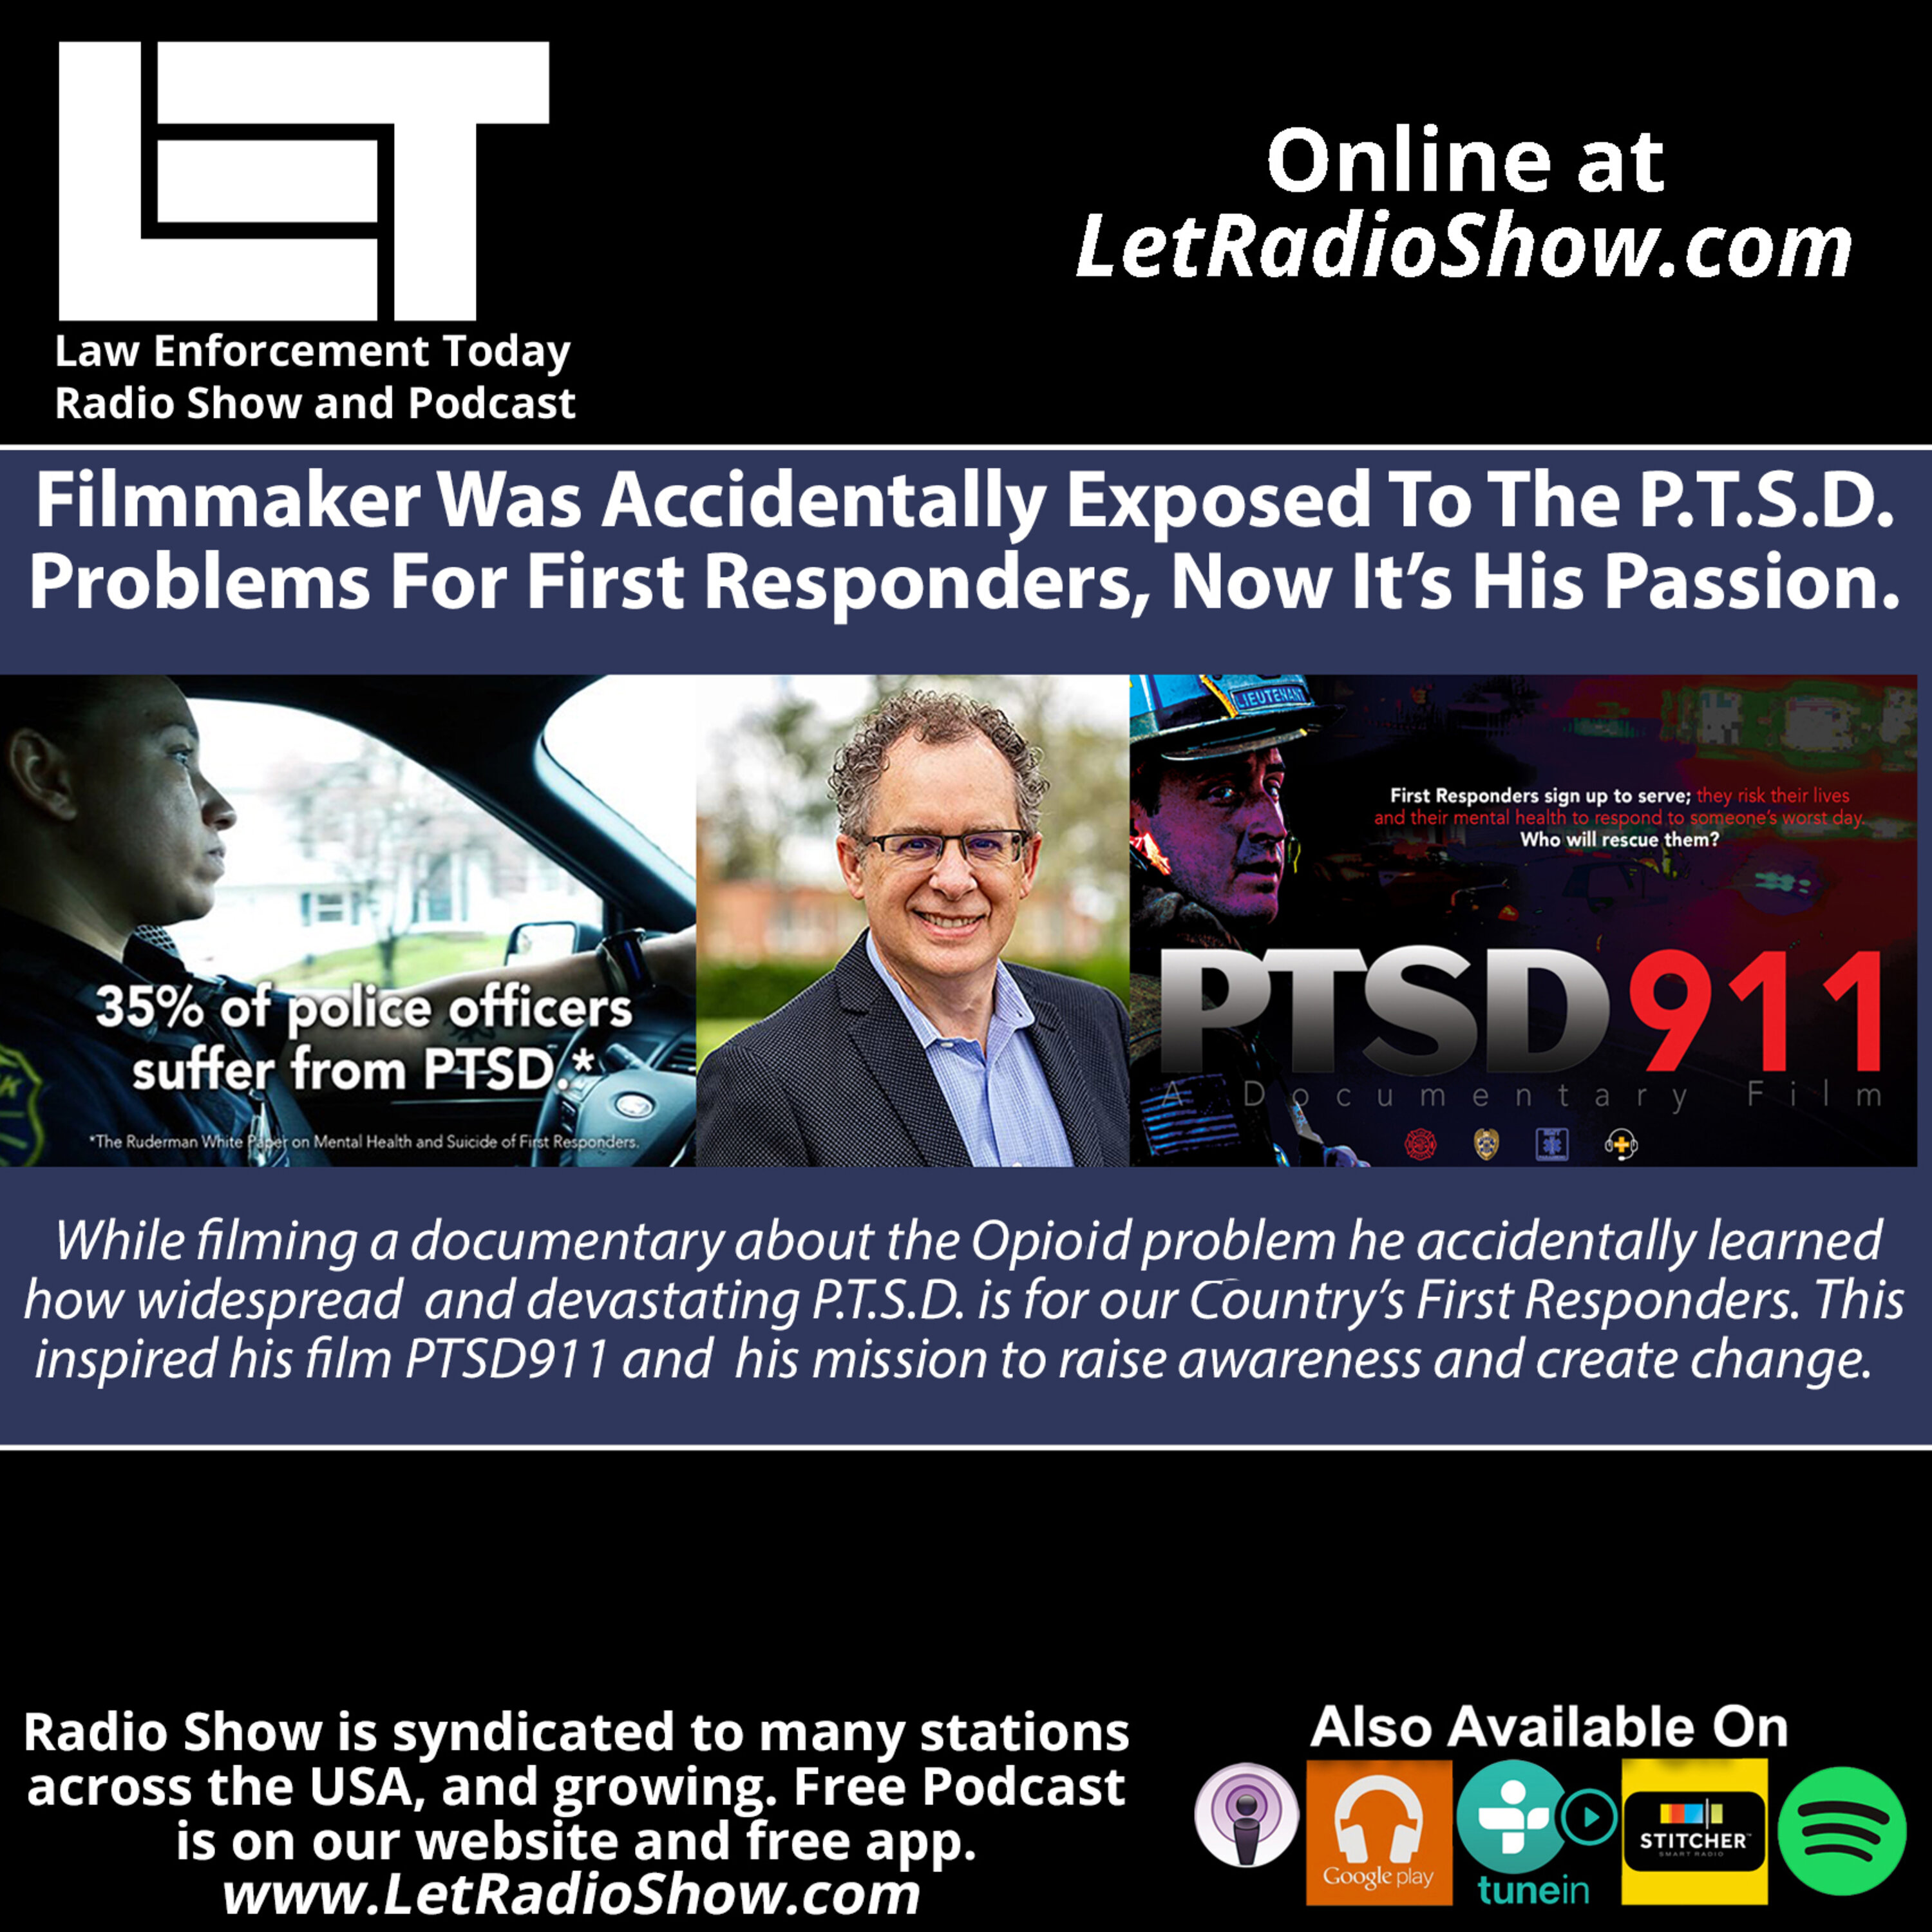 S6E91: Filmmaker Was Accidentally Exposed To The P.T.S.D. Problem For First Responders, Now It’s His Passion. Image